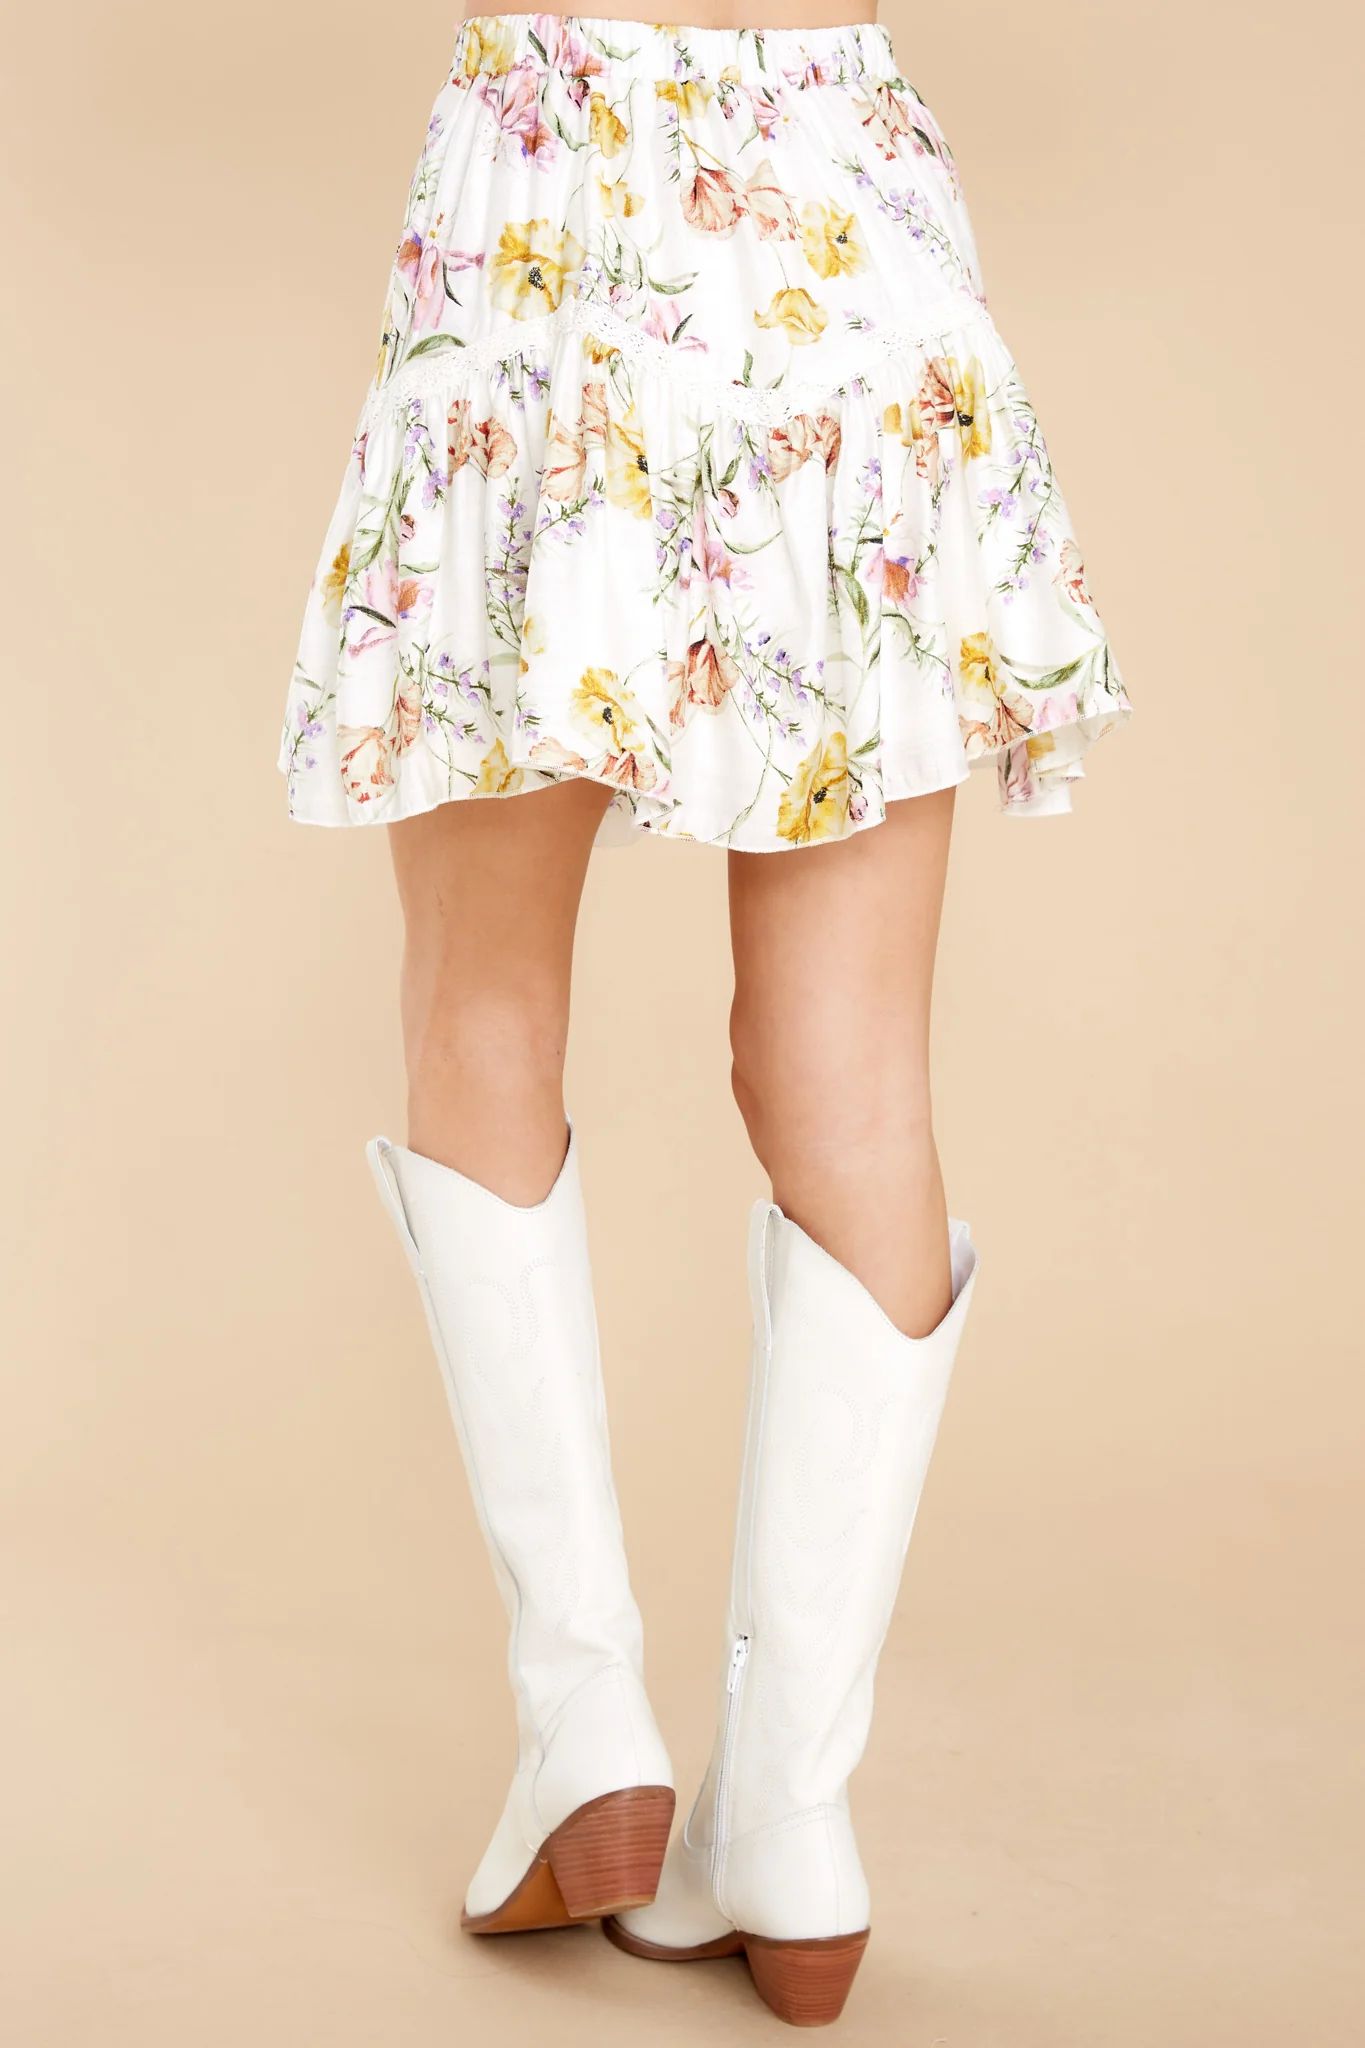 April Showers White Floral Skirt | Red Dress 